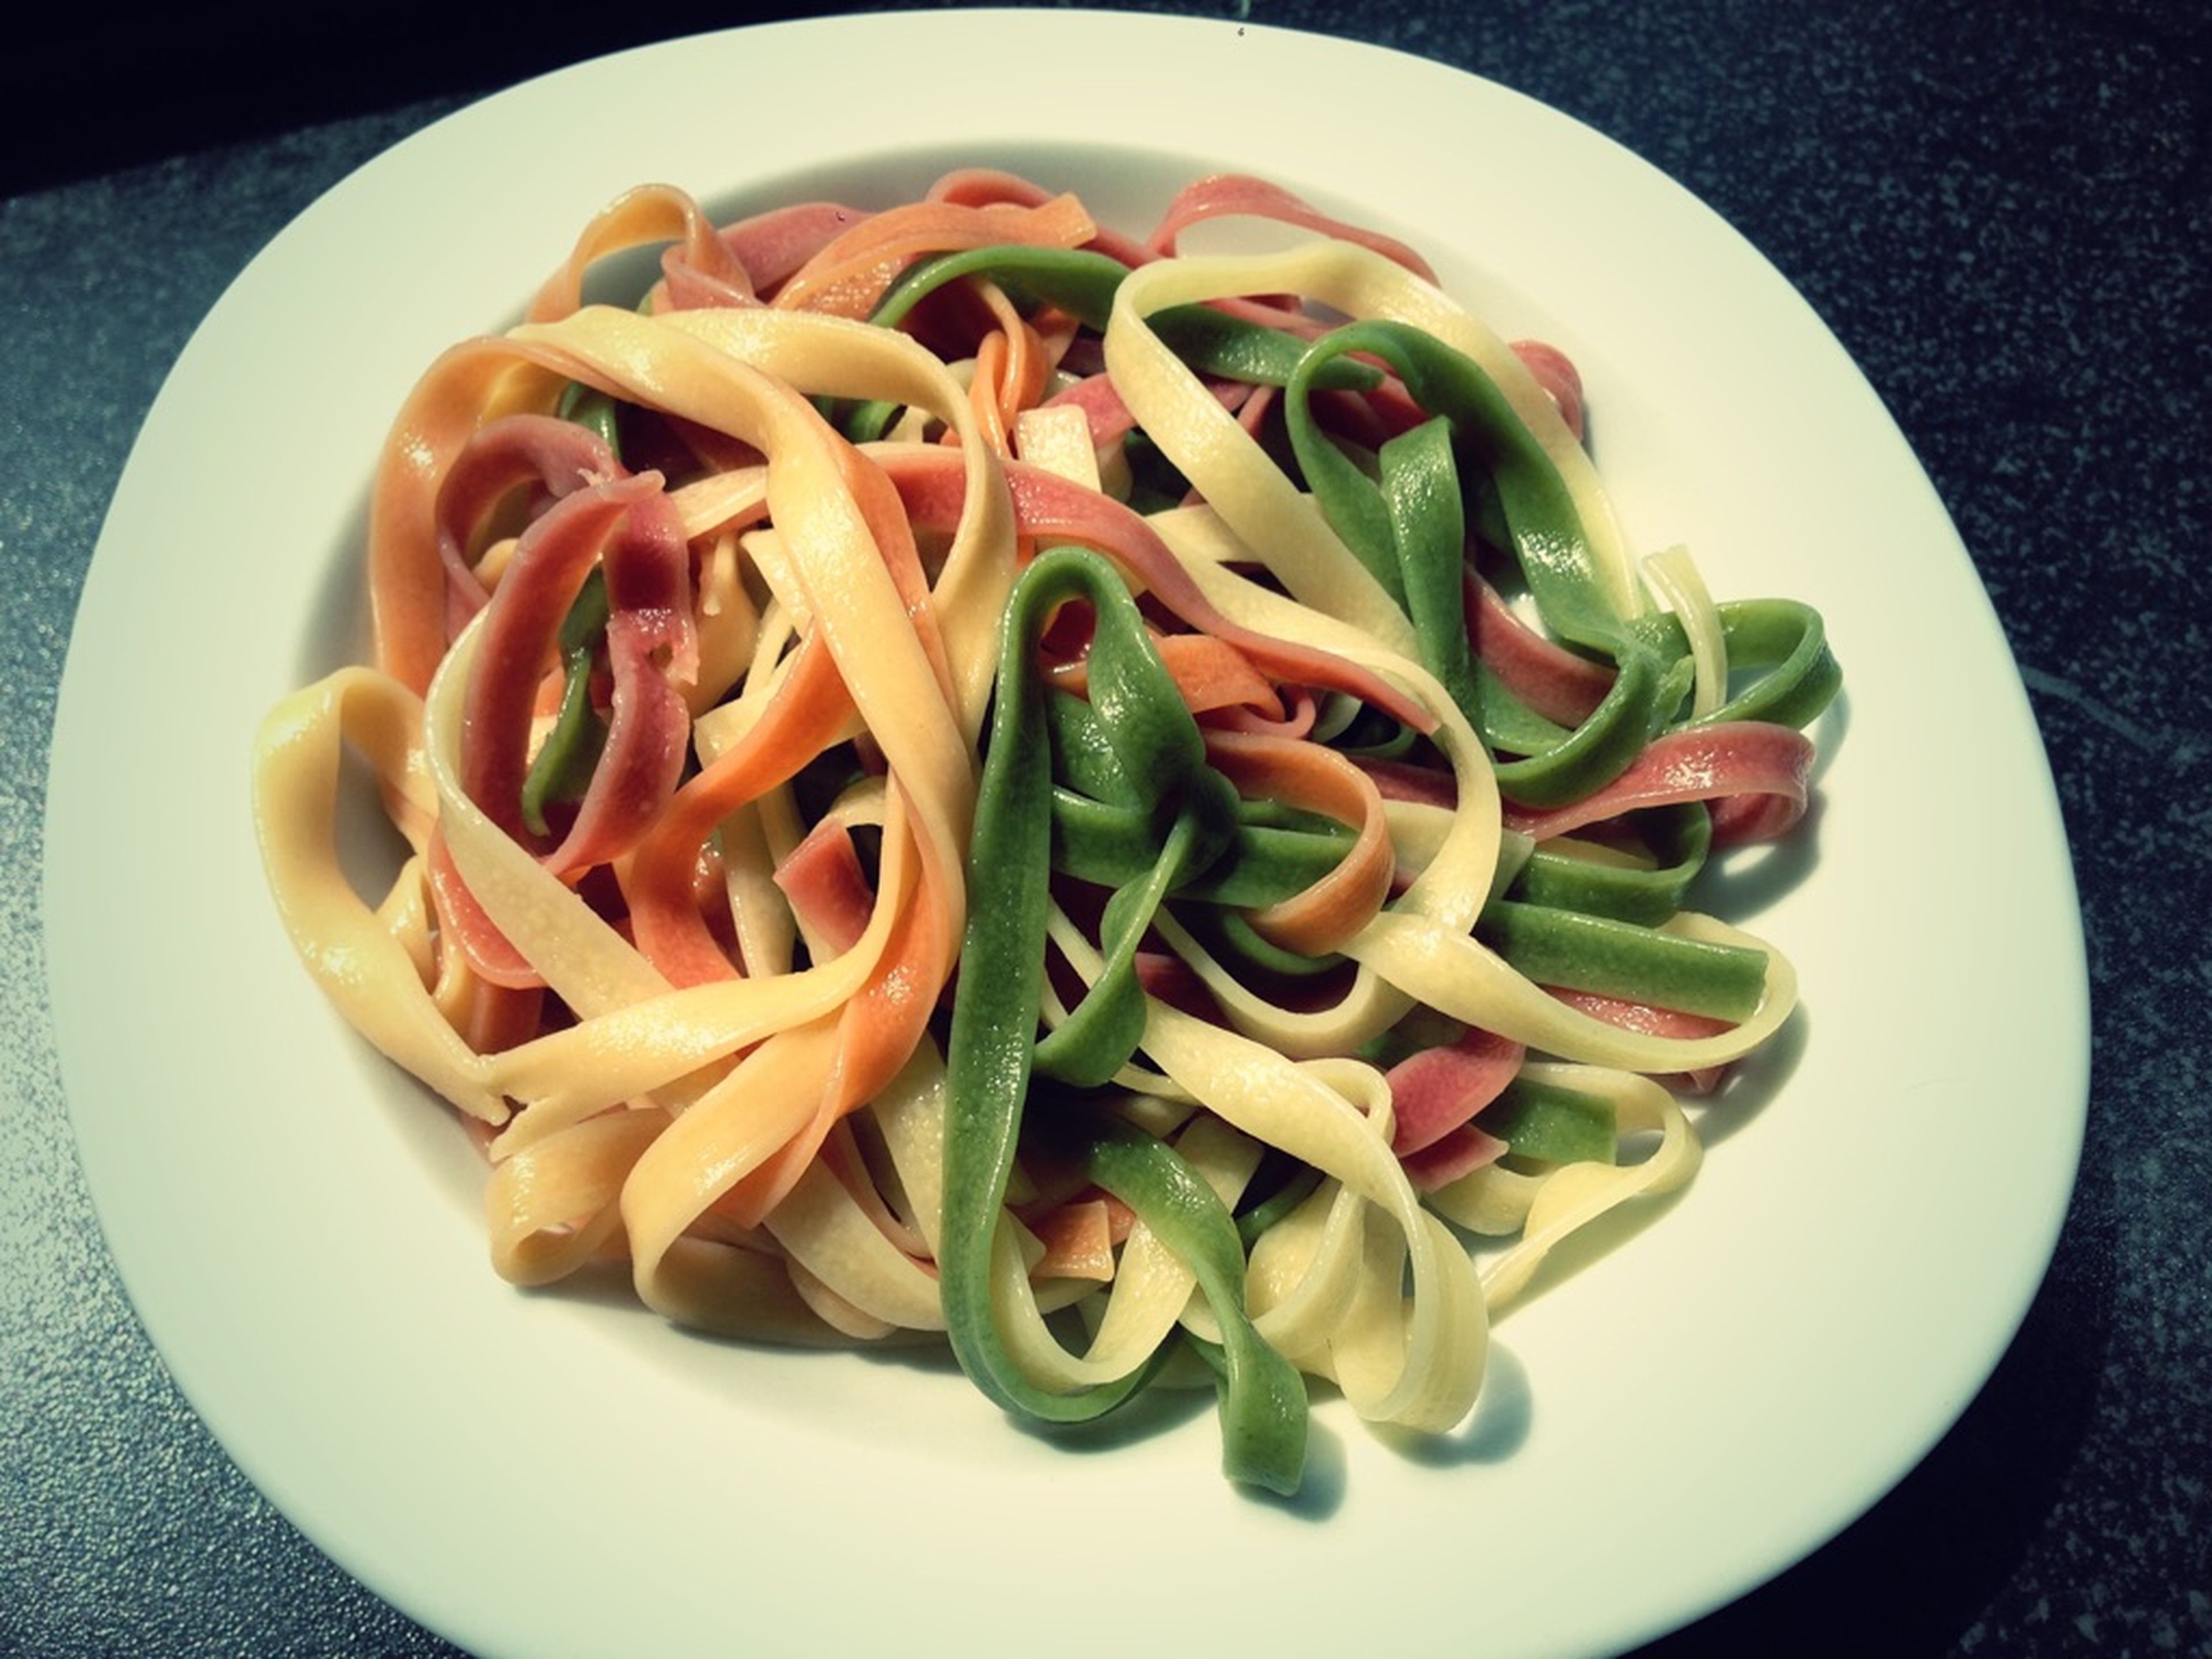 Strain tagliatelle and transfer to plates. Serve with tomato-smoked salmon cream sauce and garnish with basil. Enjoy!